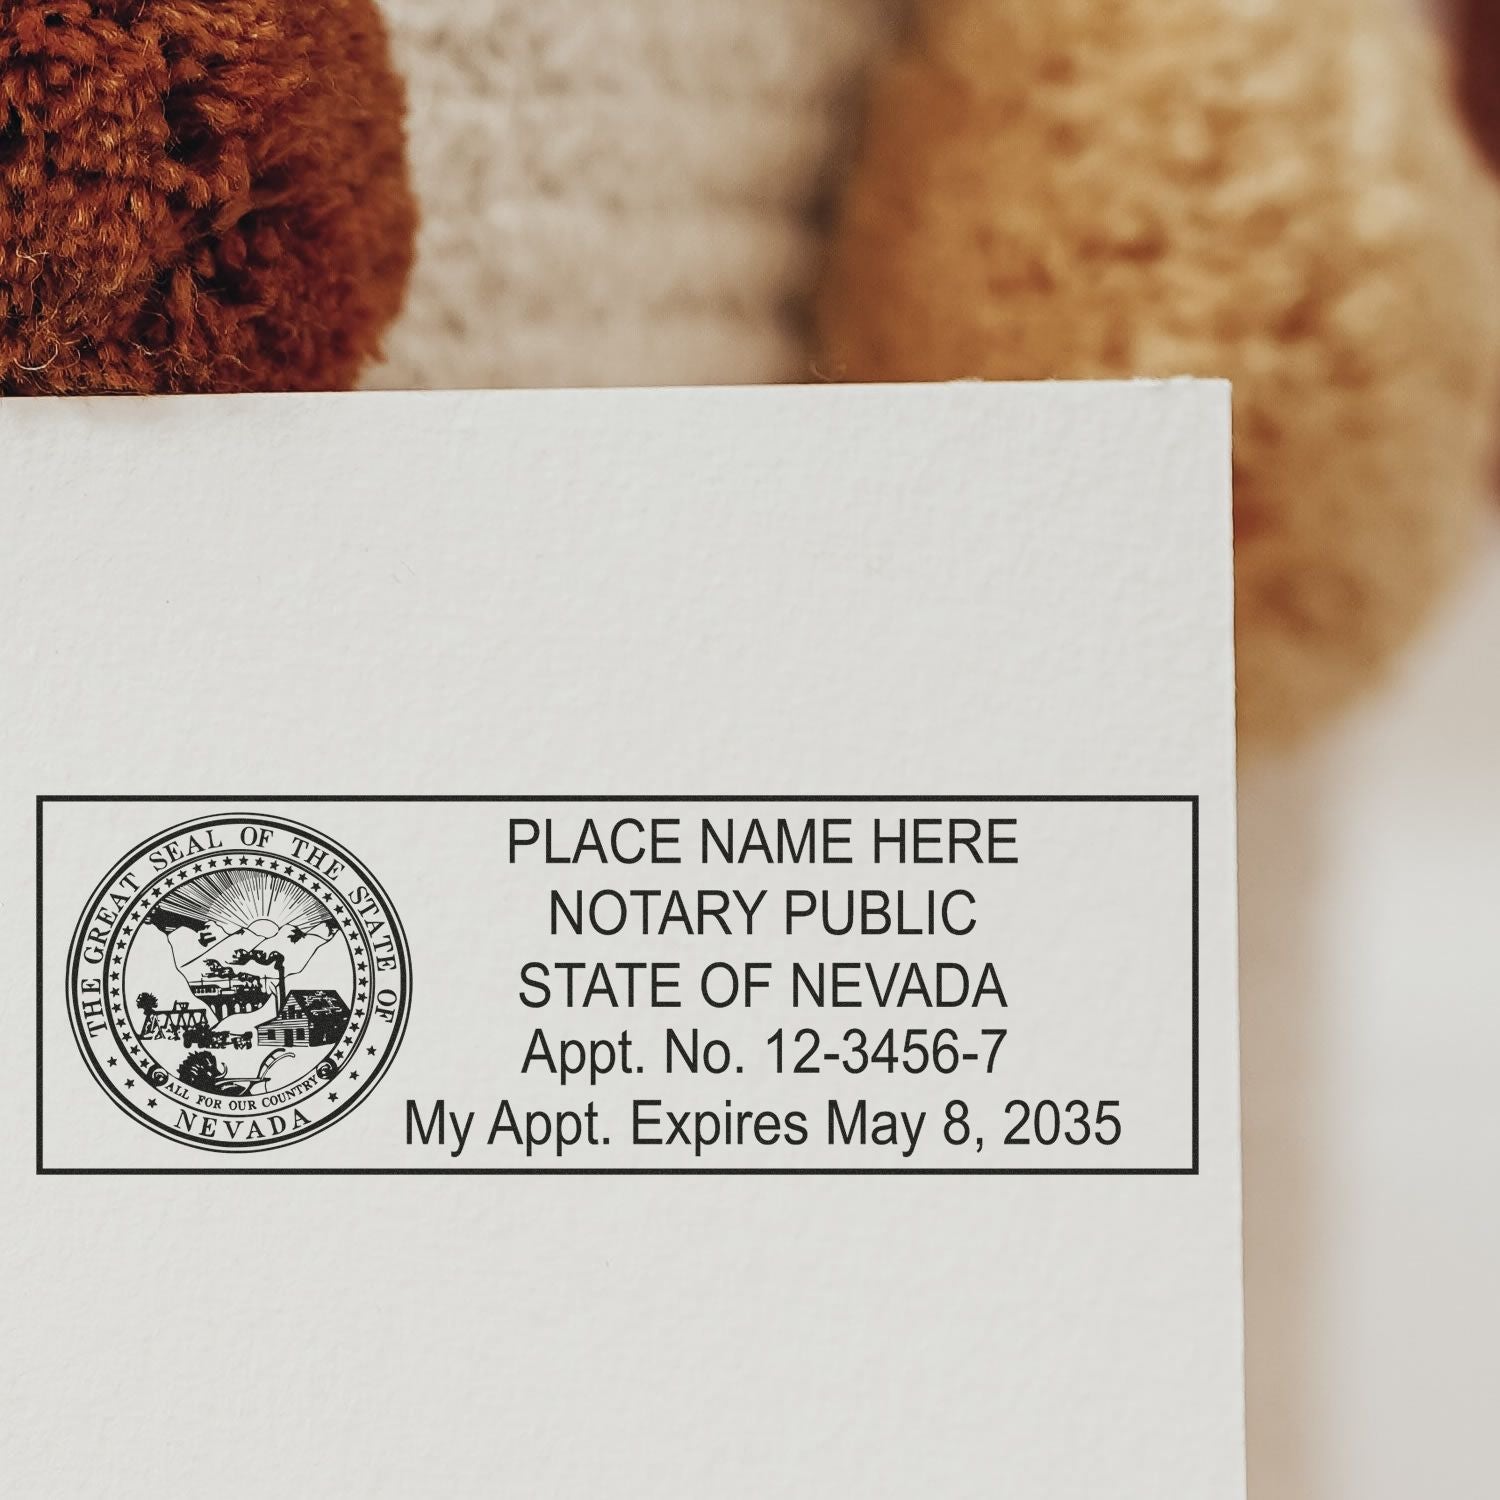 The main image for the MaxLight Premium Pre-Inked Nevada State Seal Notarial Stamp depicting a sample of the imprint and electronic files